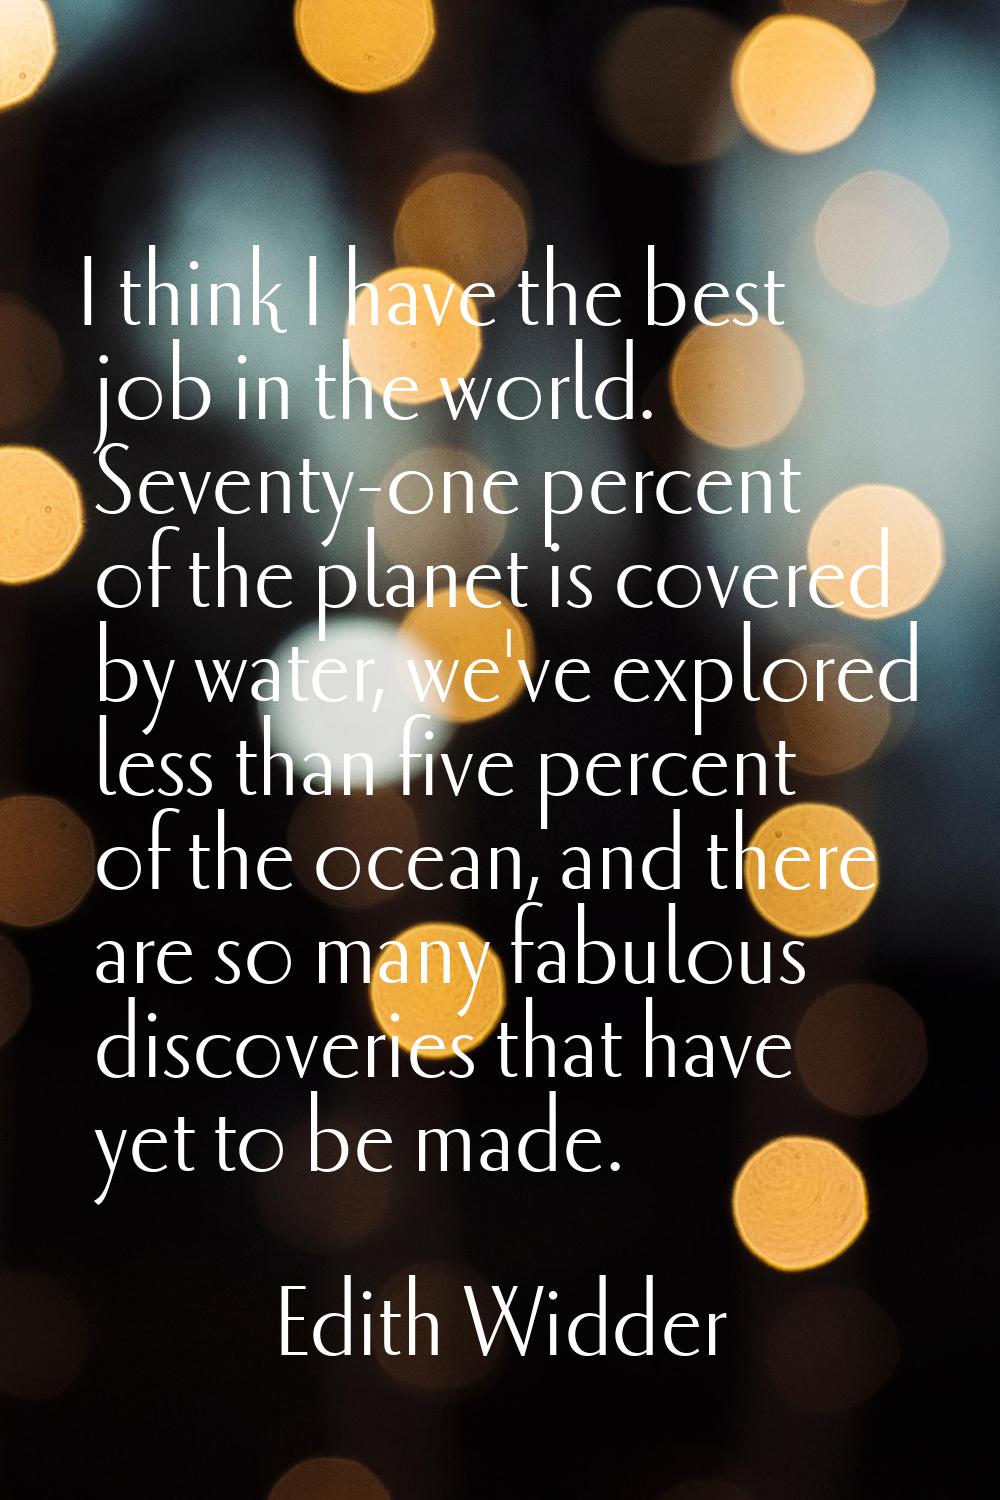 I think I have the best job in the world. Seventy-one percent of the planet is covered by water, we